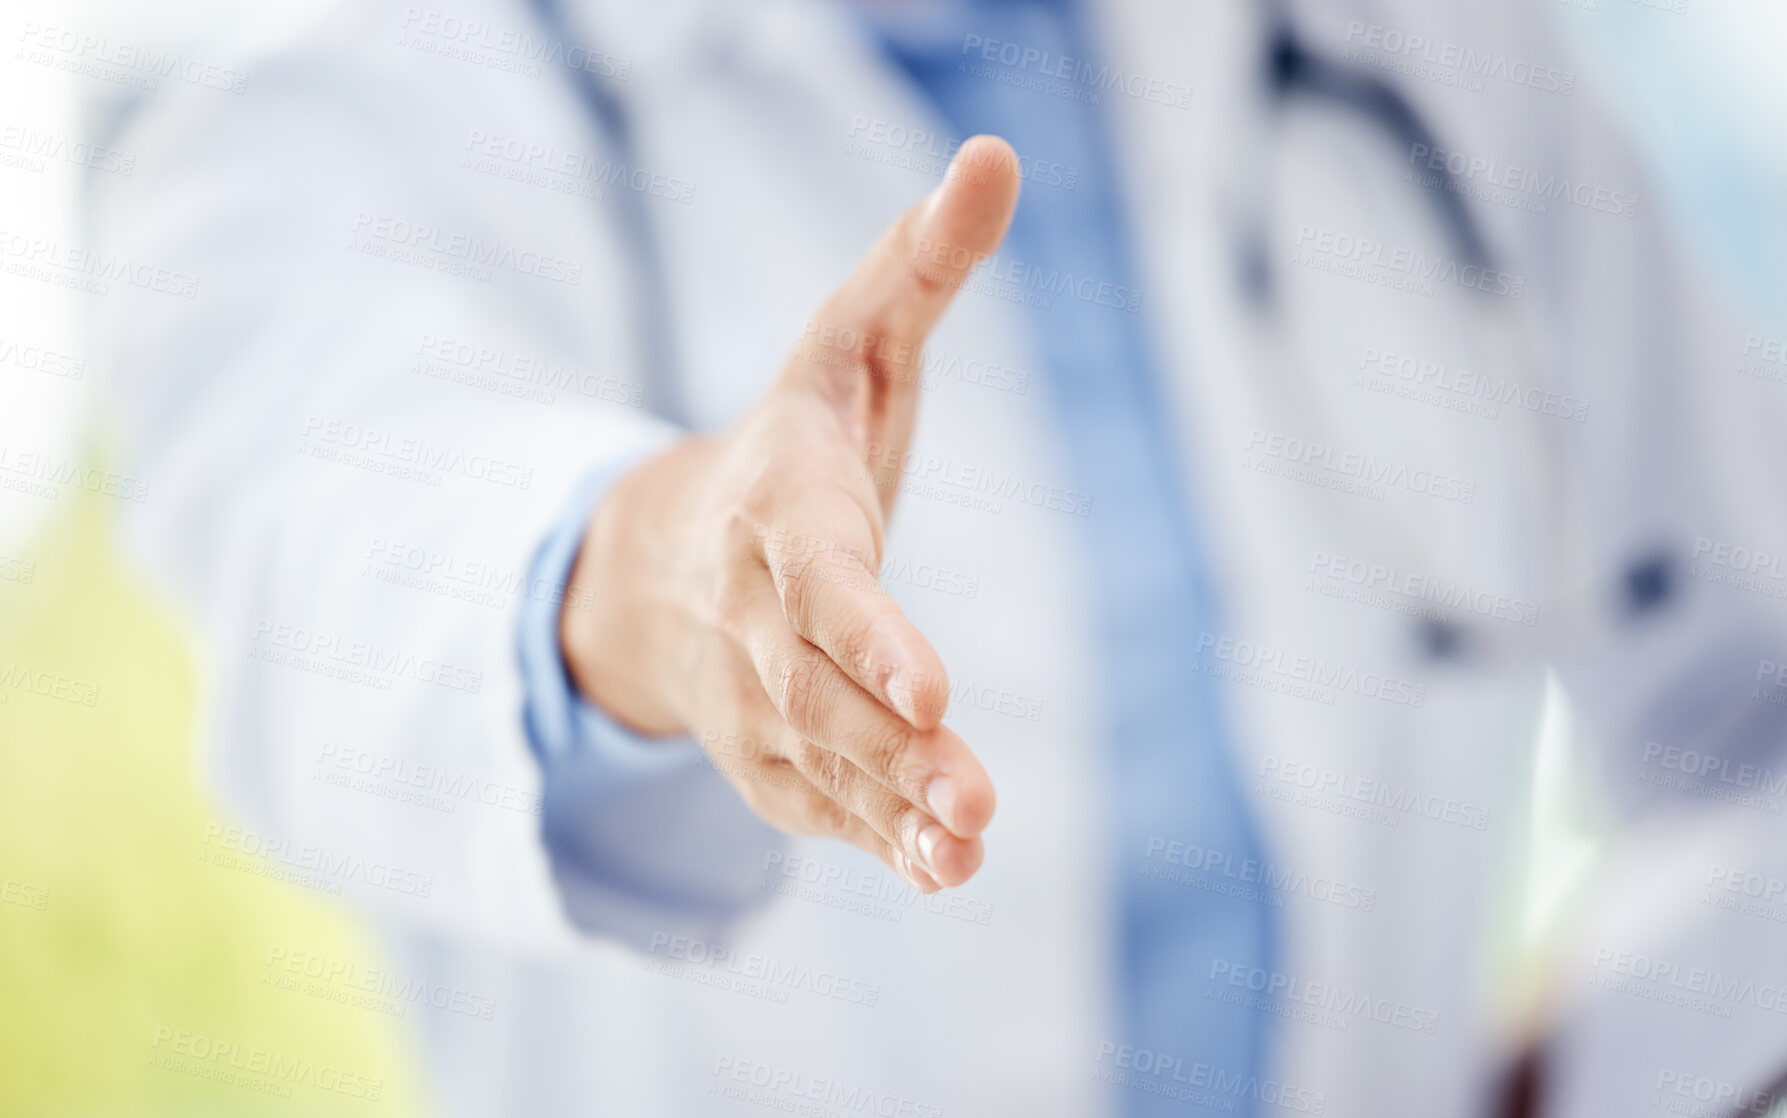 Buy stock photo Closeup shot of an unrecognisable doctor extending a handshake in a hospital